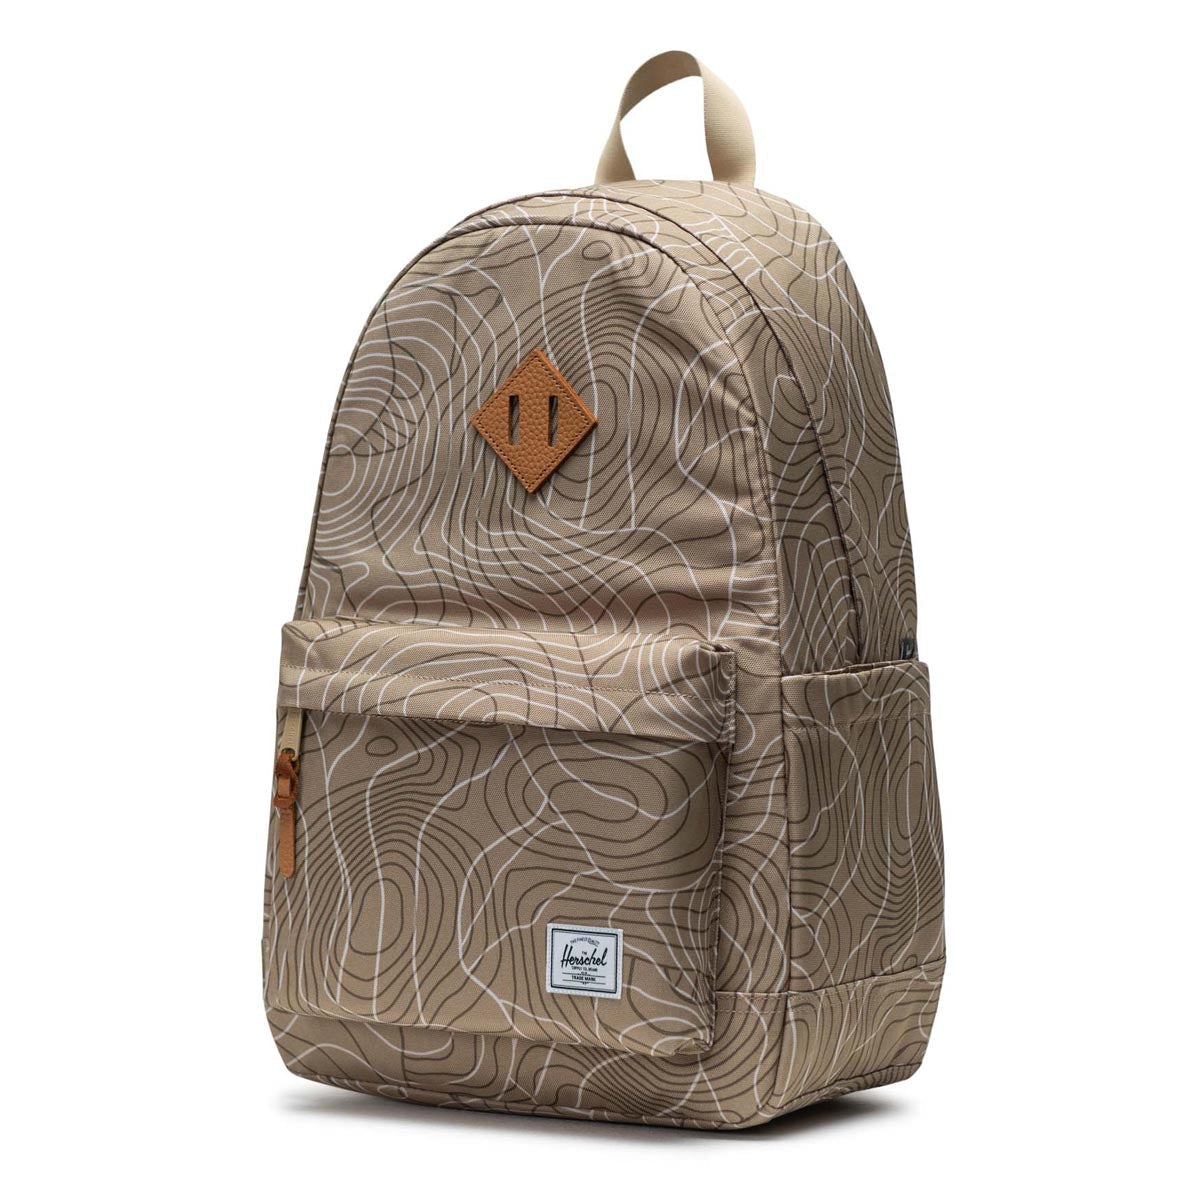 Herschel Supply Heritage Backpack - Twill Topography image 3